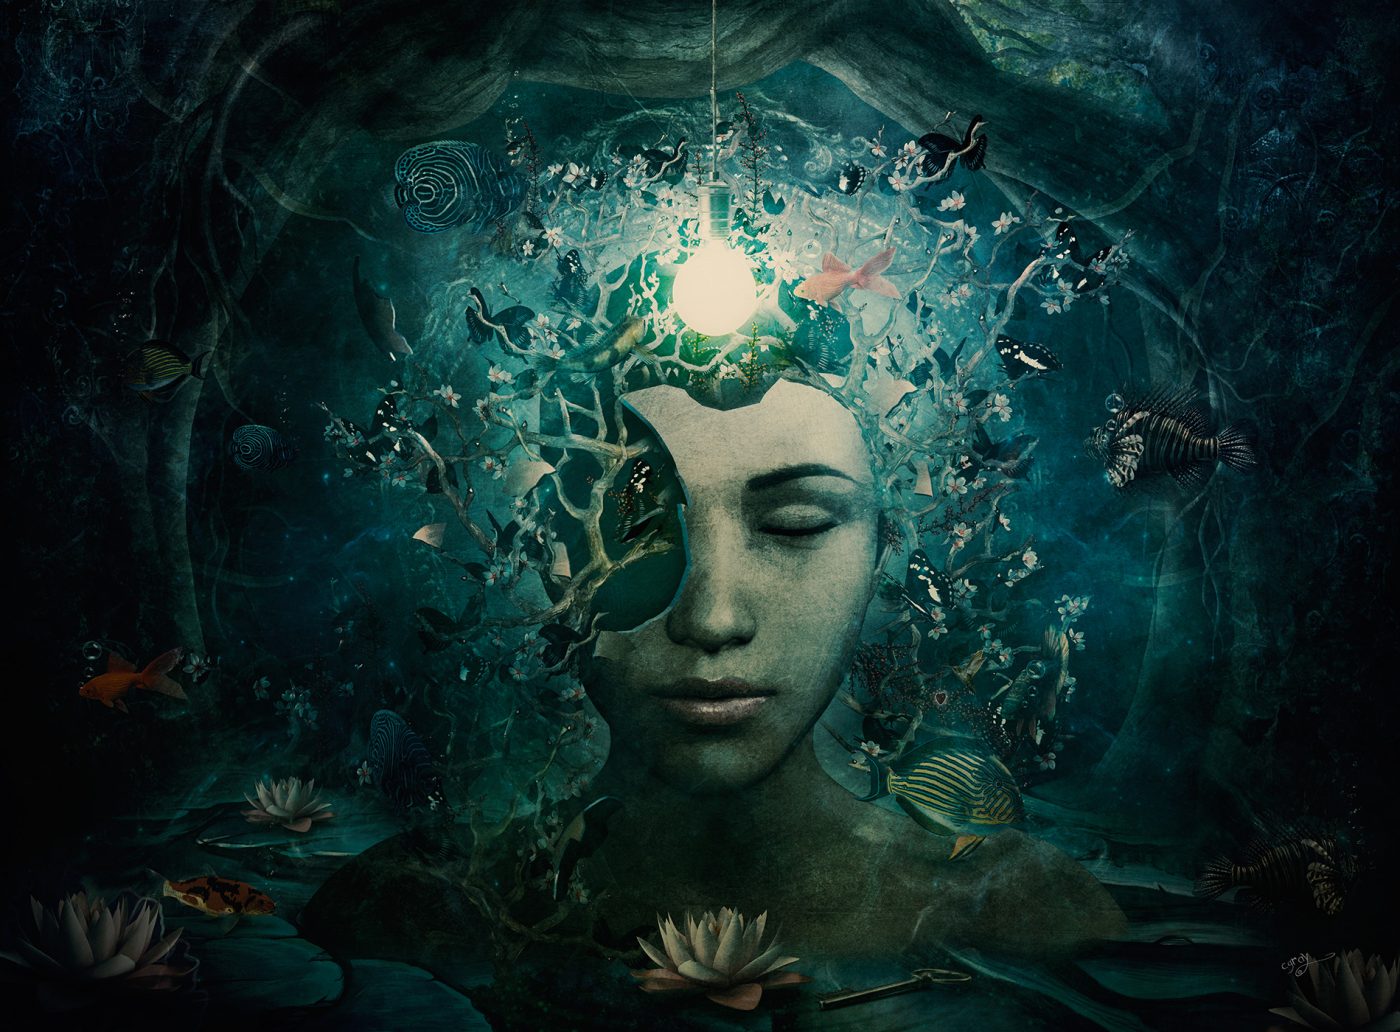 psychological surreal art for well being and healing